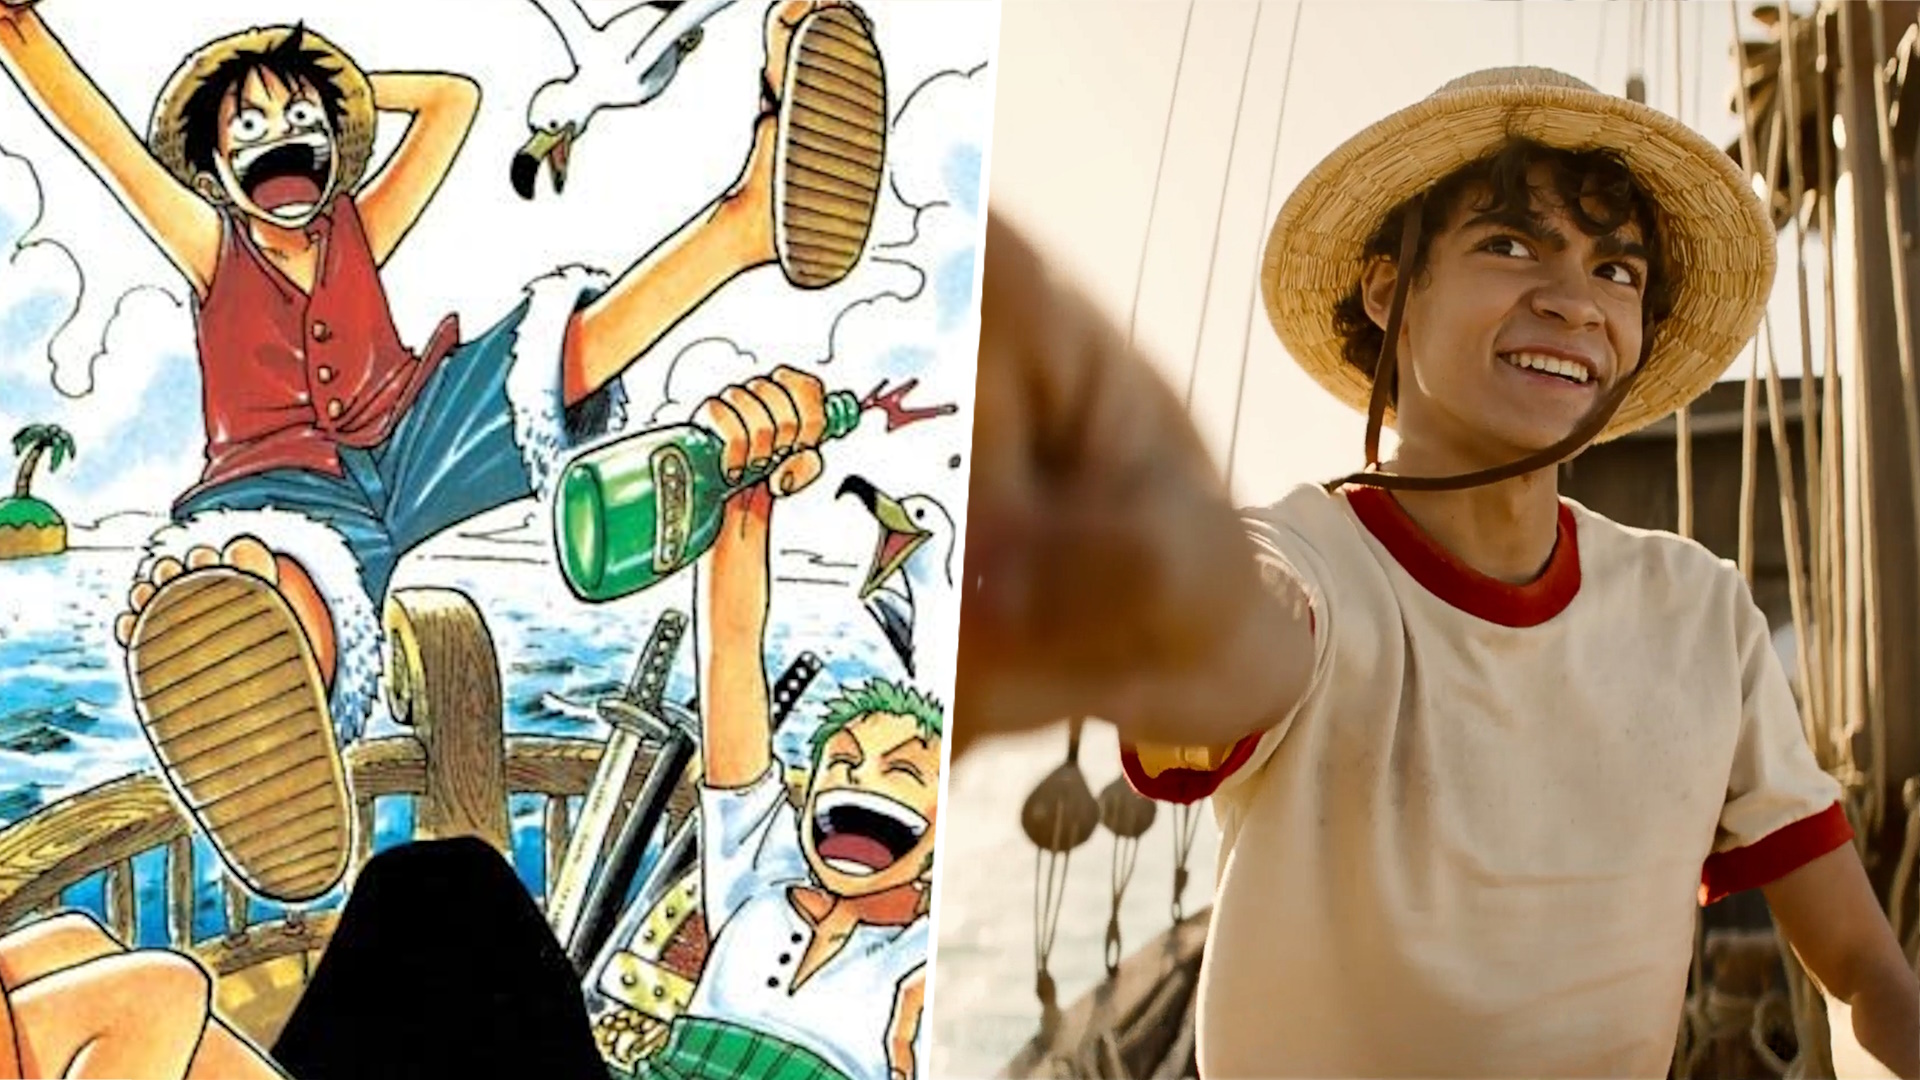 There were some cultural issues: Netflix One Piece Creator